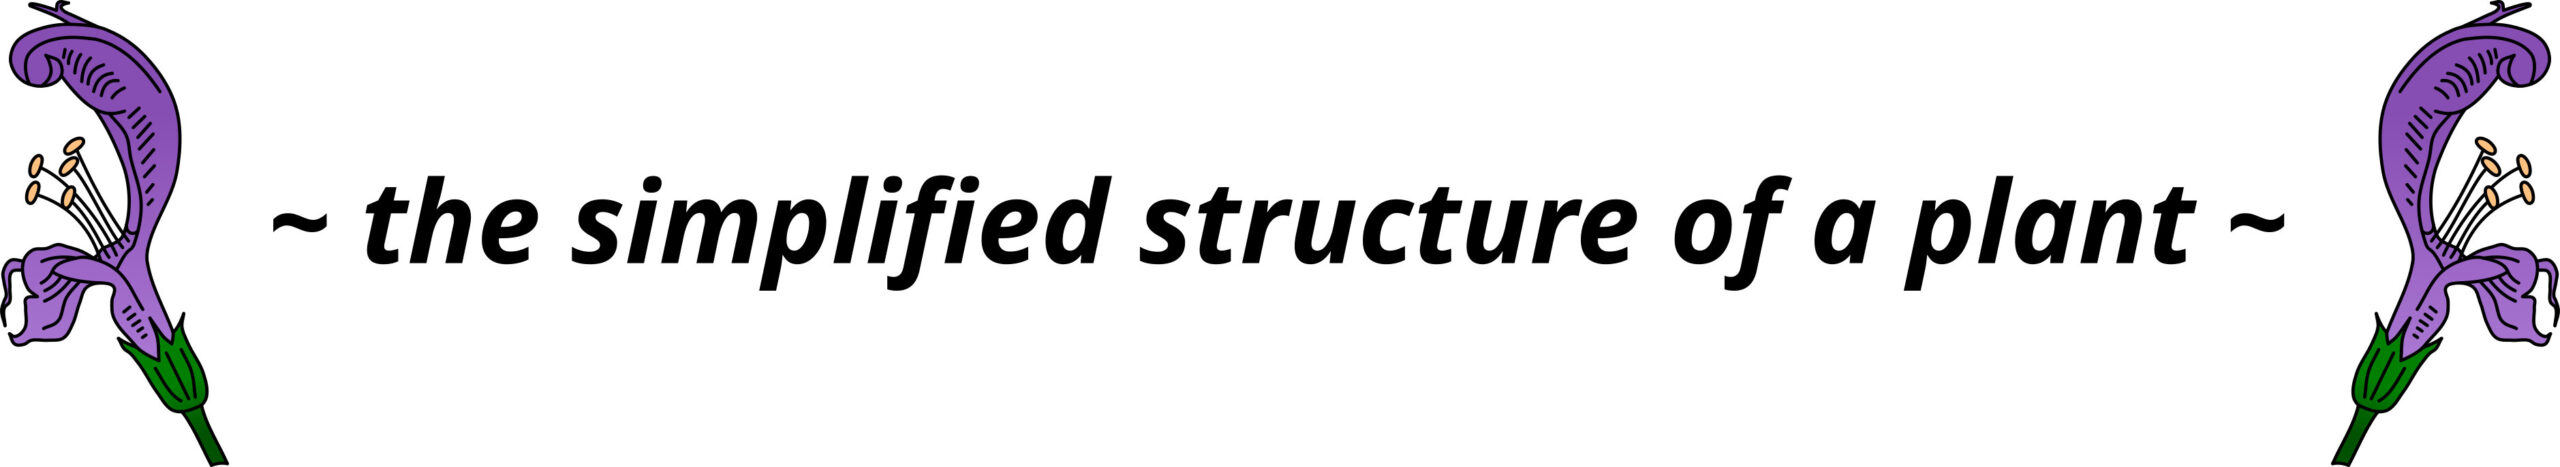 the simplified structure of a plant